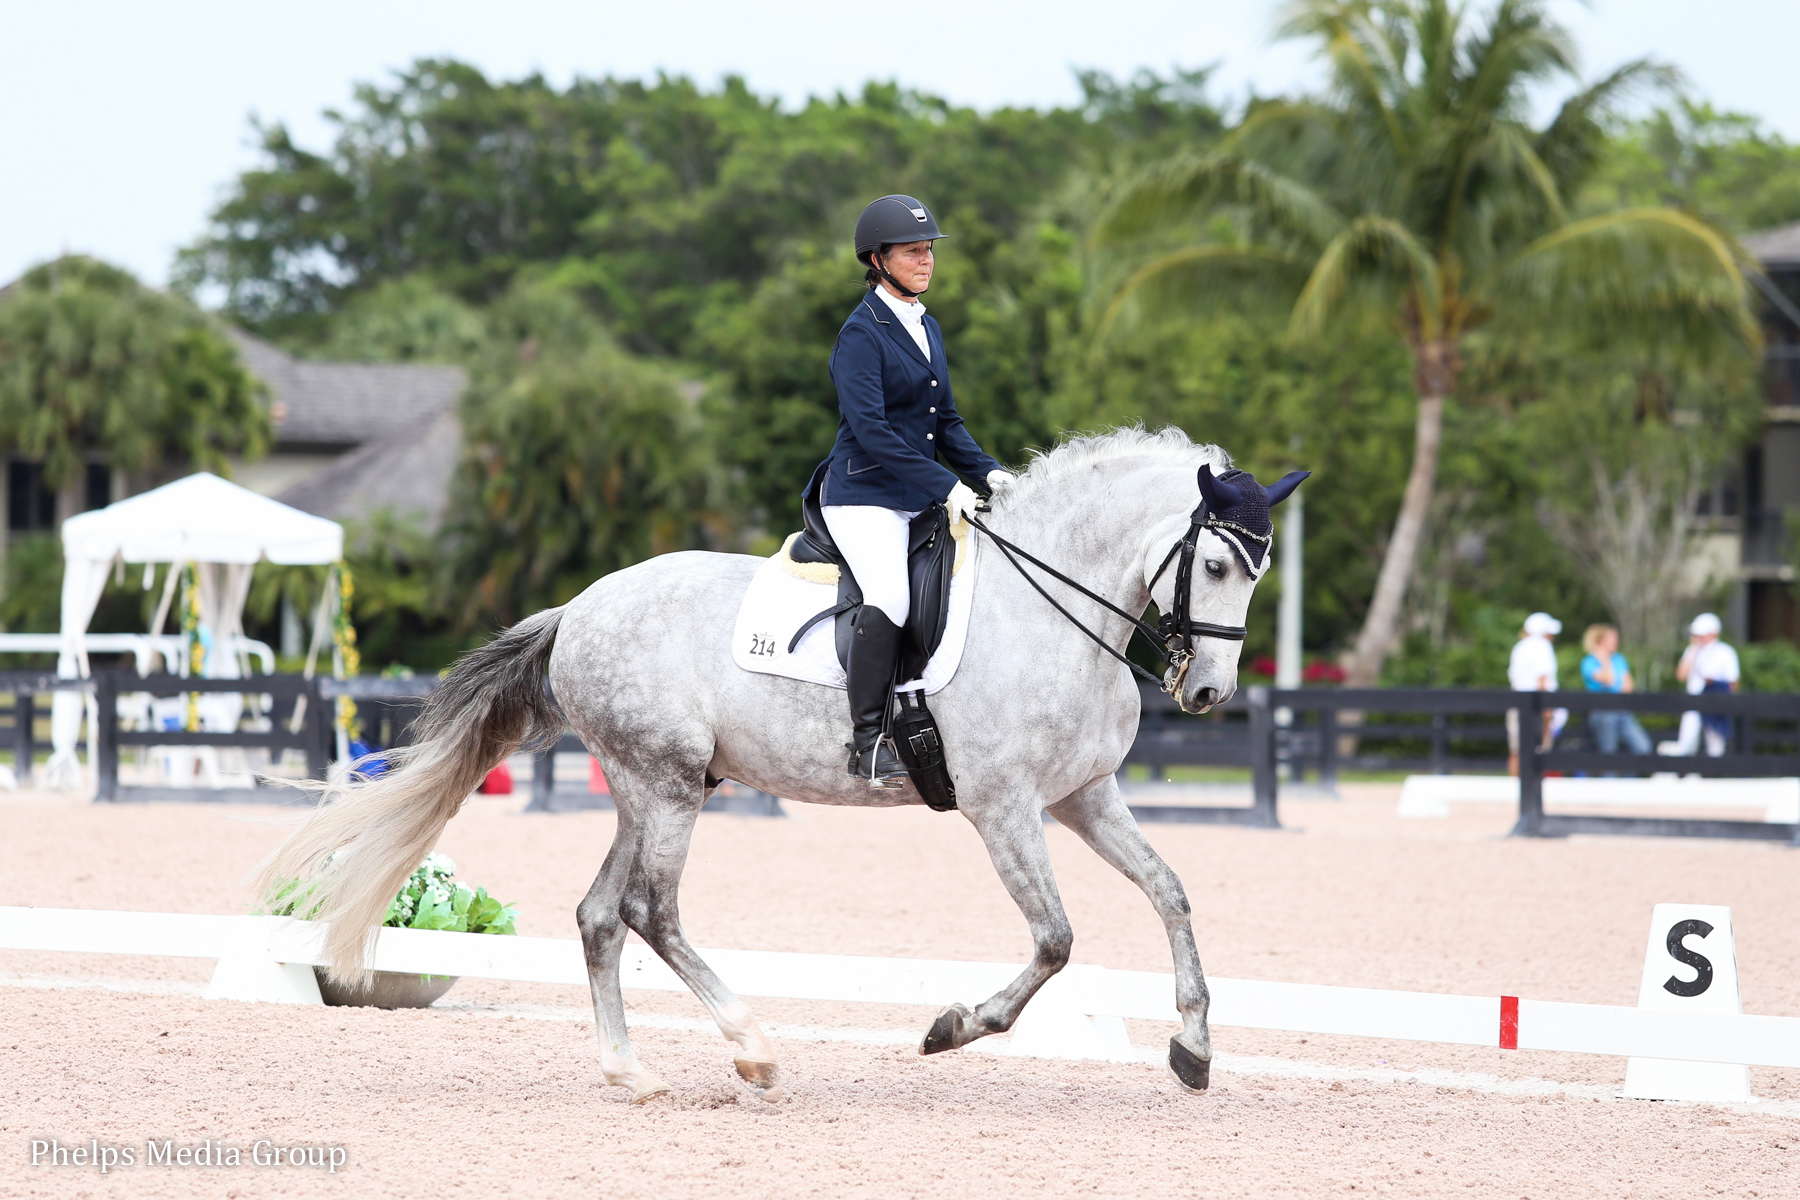 Wendy Inch and Presumido CIV compete at Third Level at the Adequan Global Dressage Festival. Photo by Annan Hepner